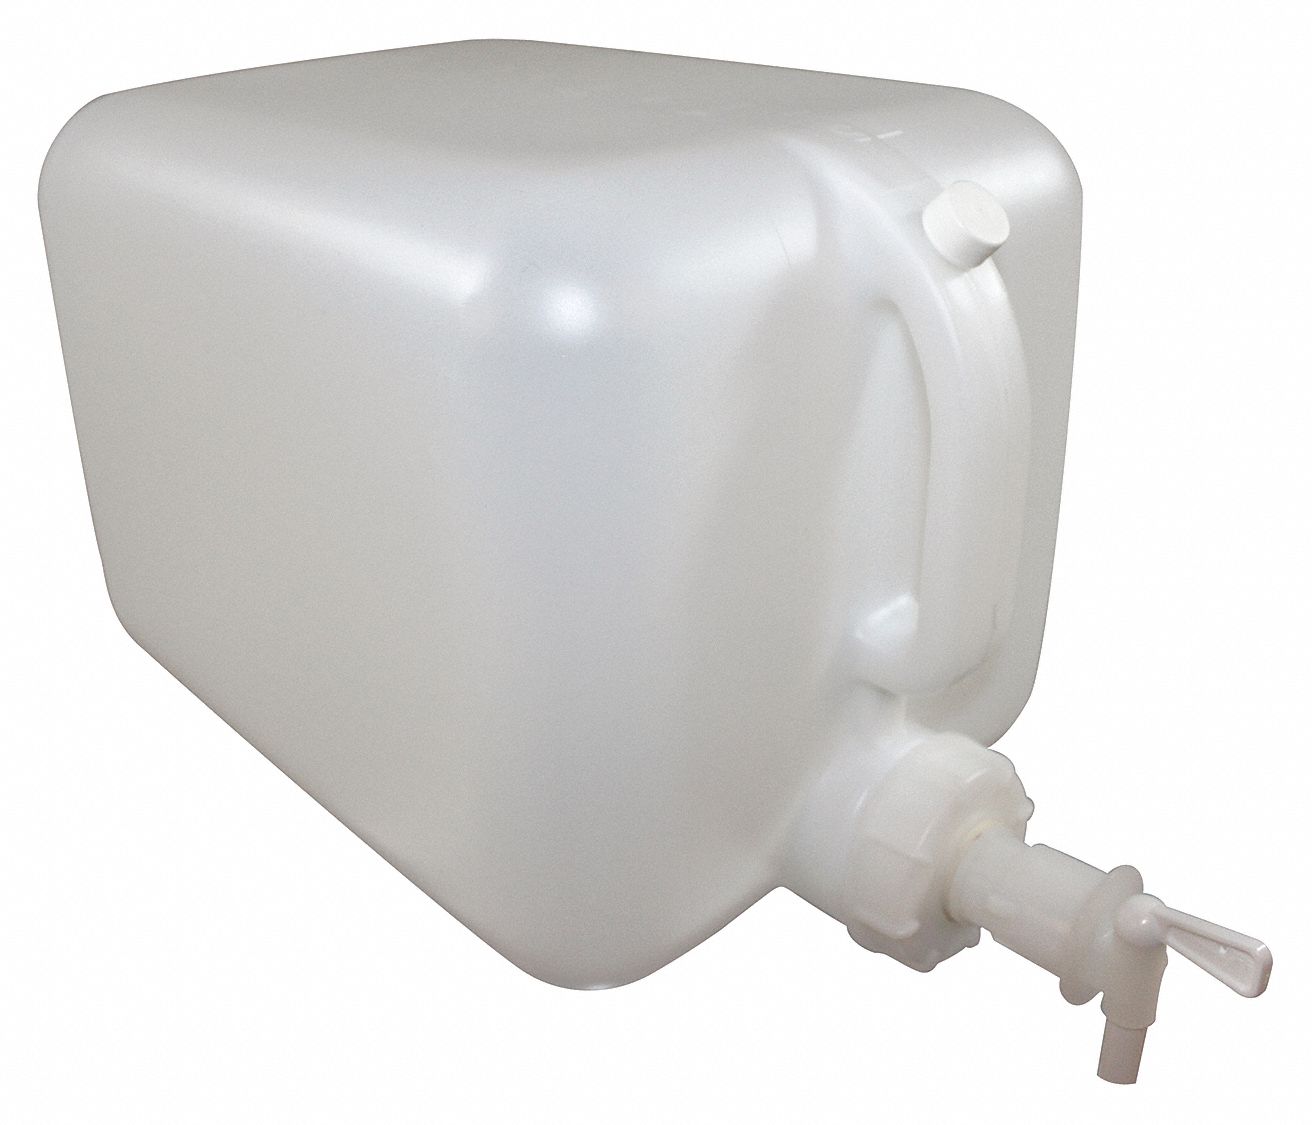 39FD15 - Dispensing Container with Faucet 5 gal.